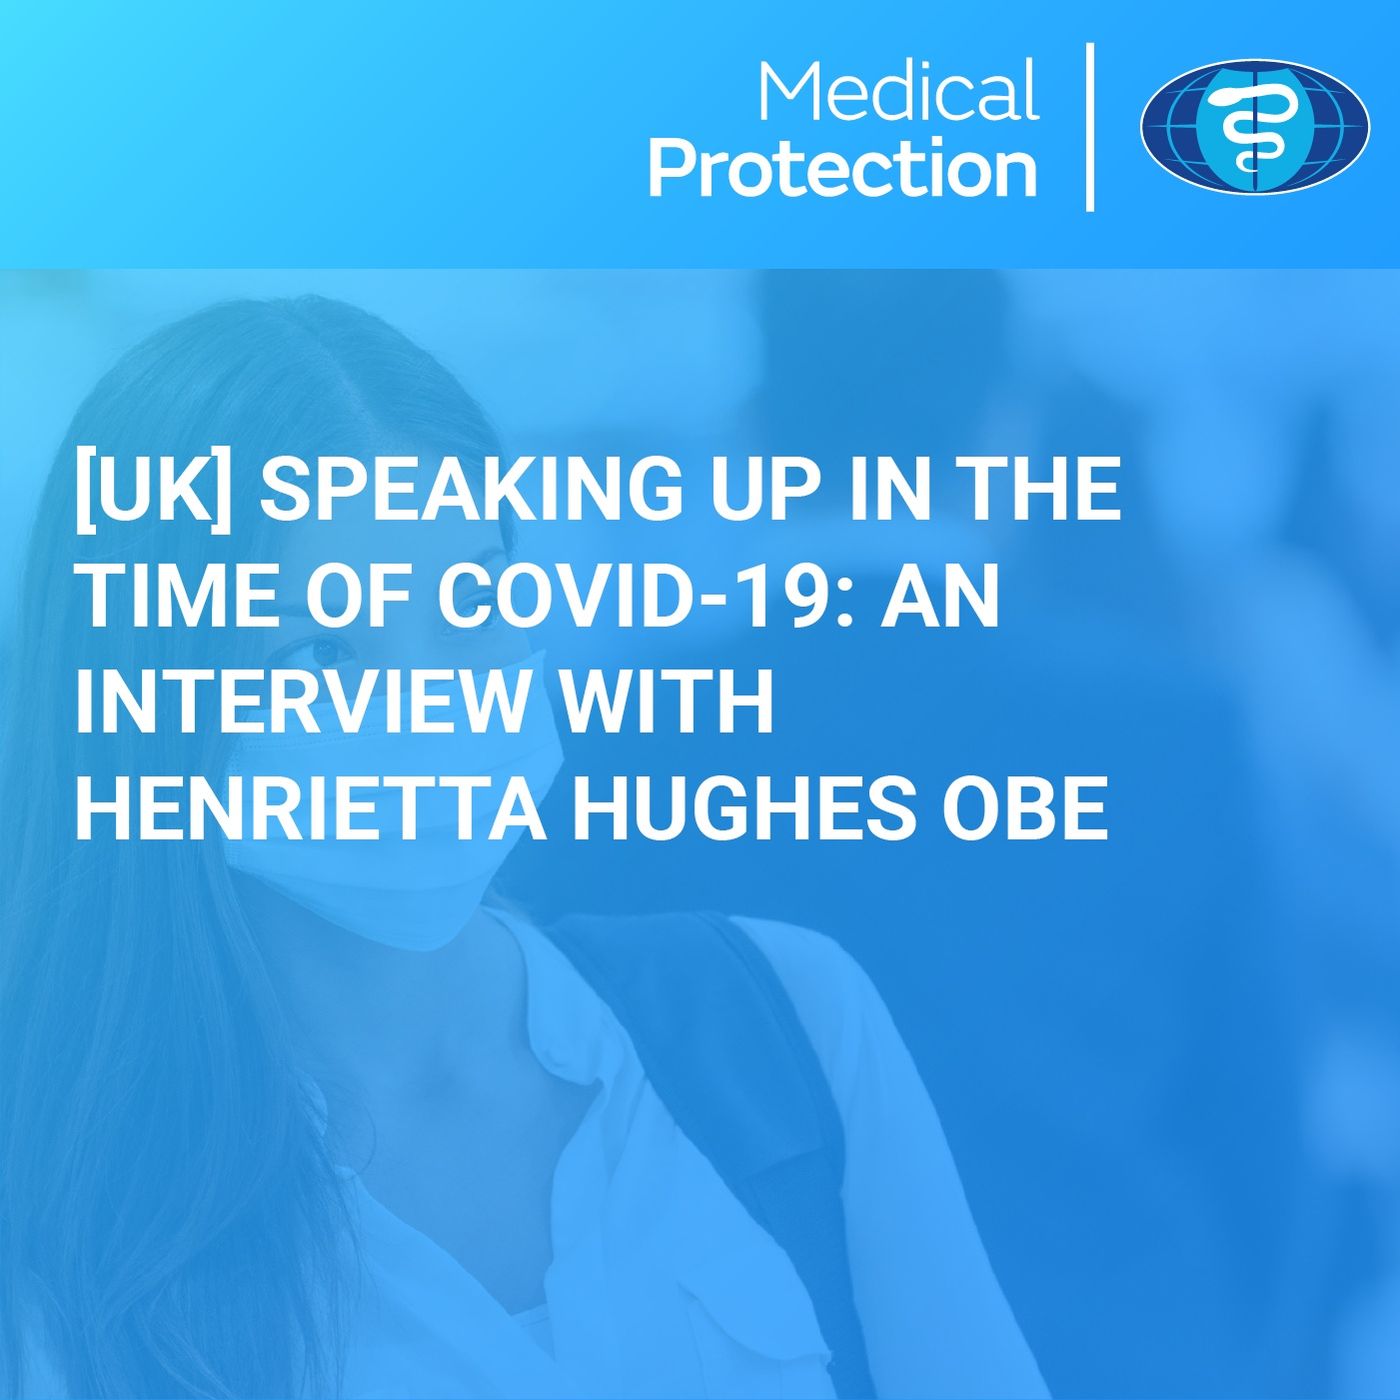 Speaking up in the time of COVID-19: An interview with Henrietta Hughes OBE